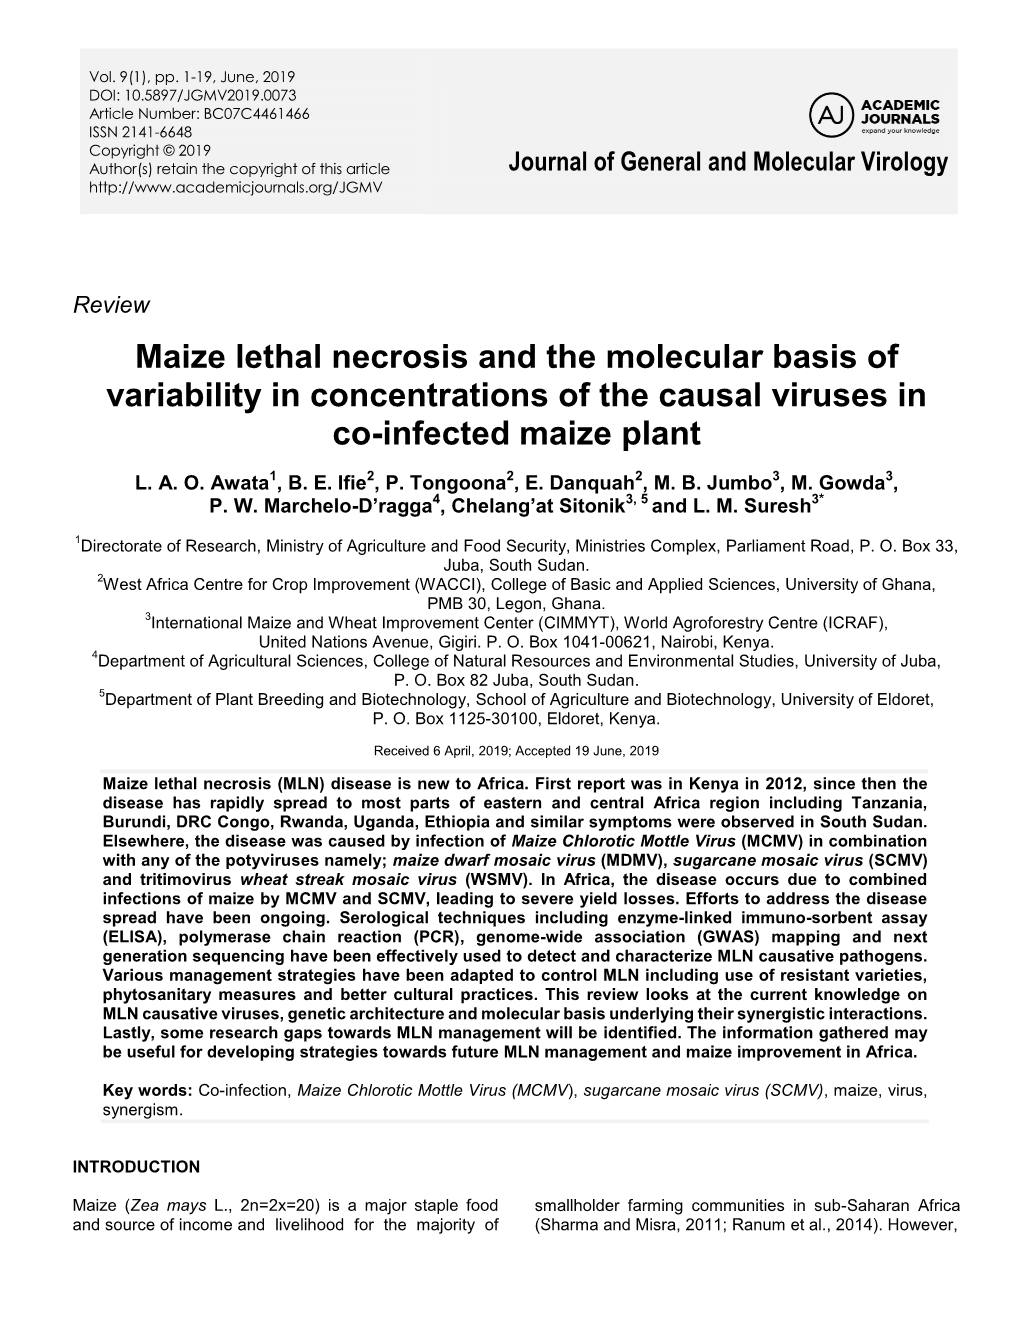 Maize Lethal Necrosis and the Molecular Basis of Variability in Concentrations of the Causal Viruses in Co-Infected Maize Plant